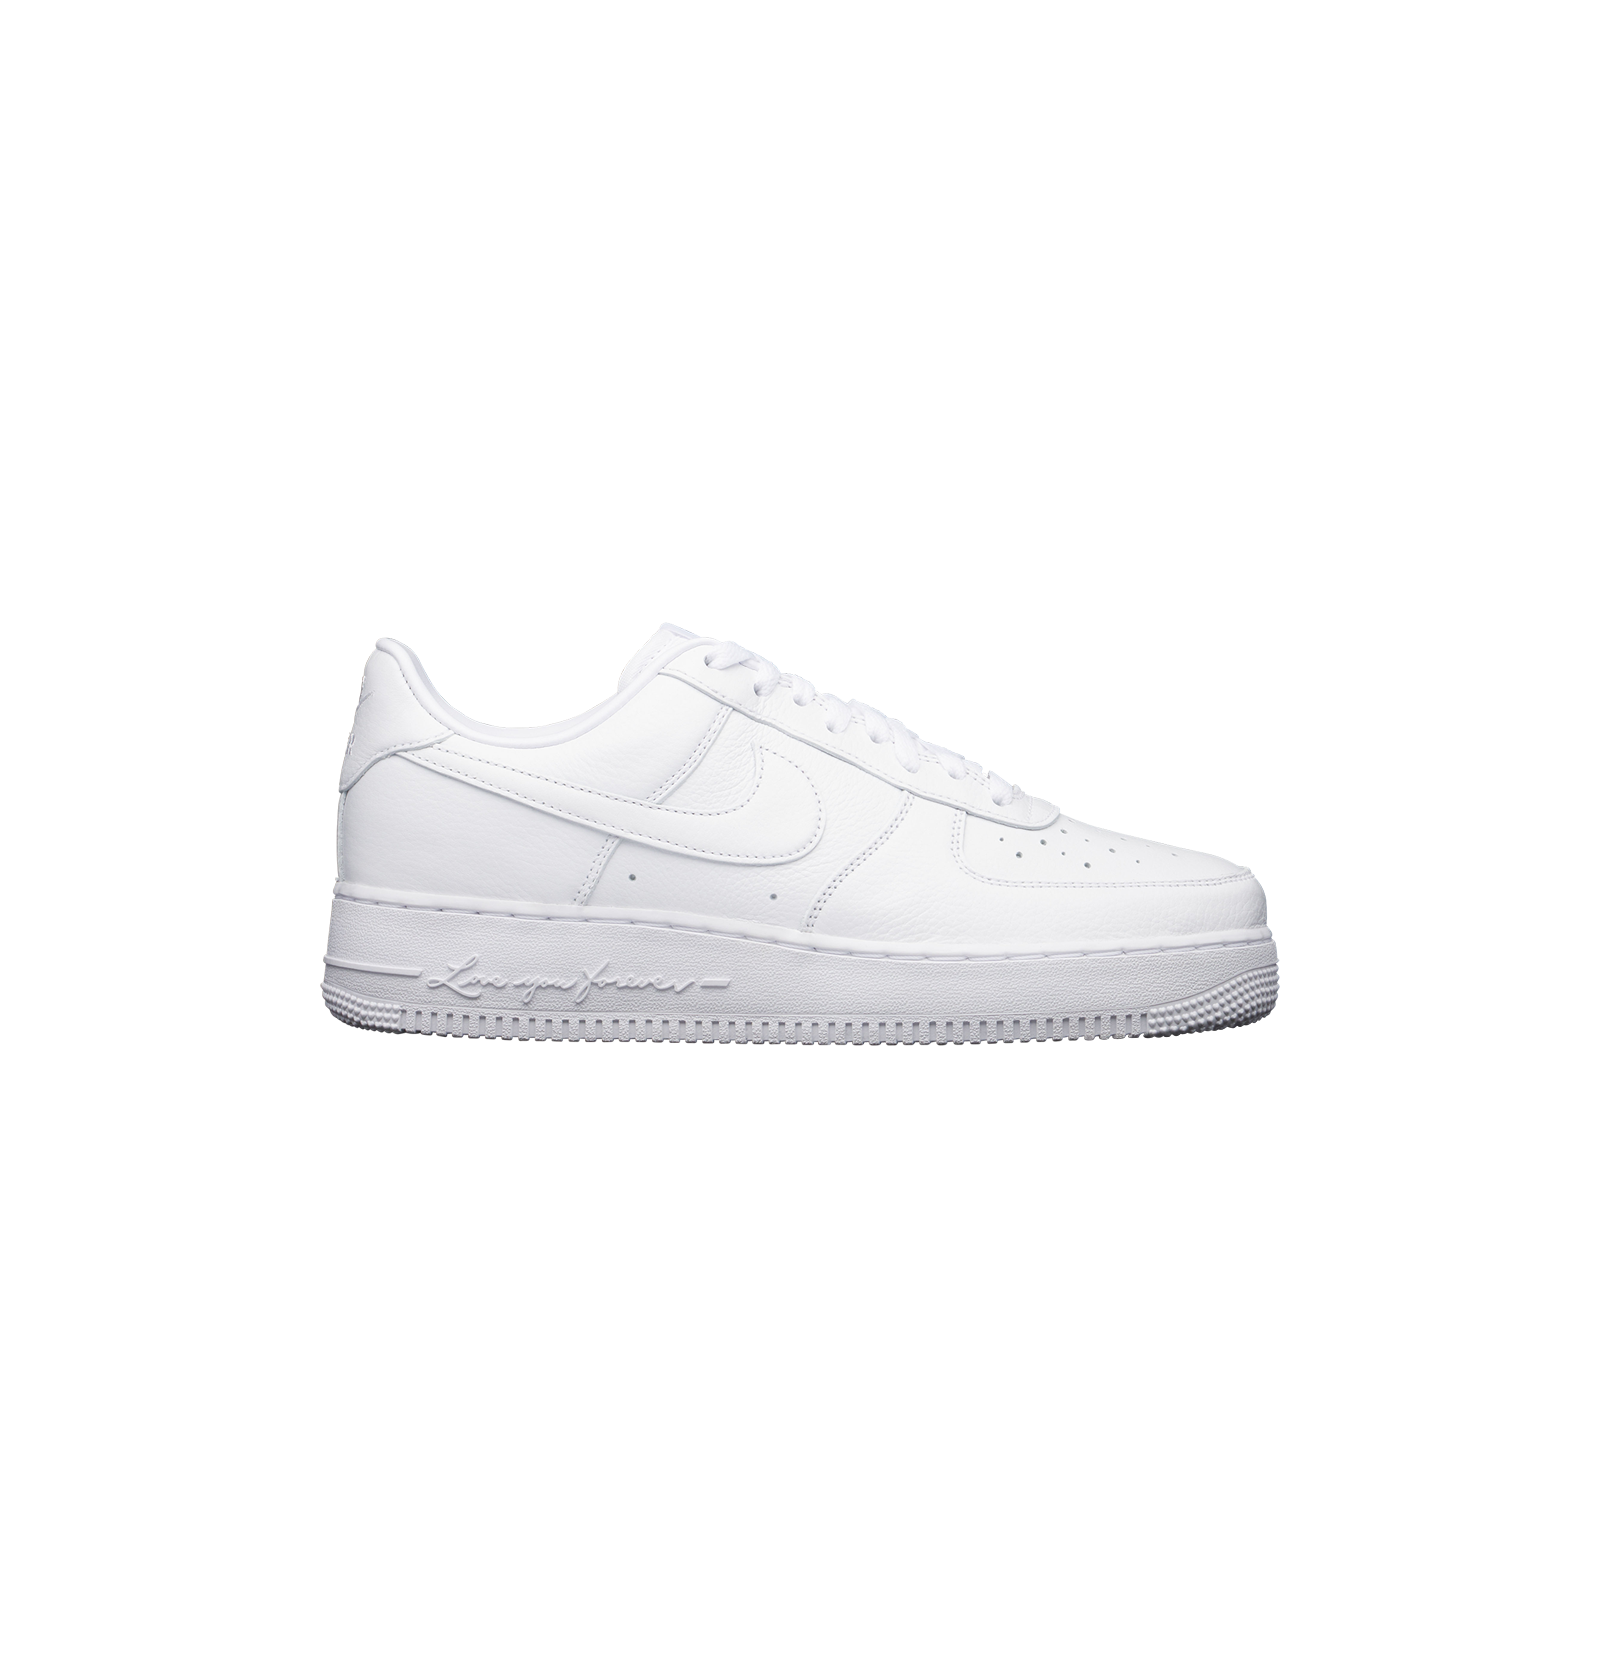 LOVE YOU FOREVER AIR FORCE 1 - IMAGE 6